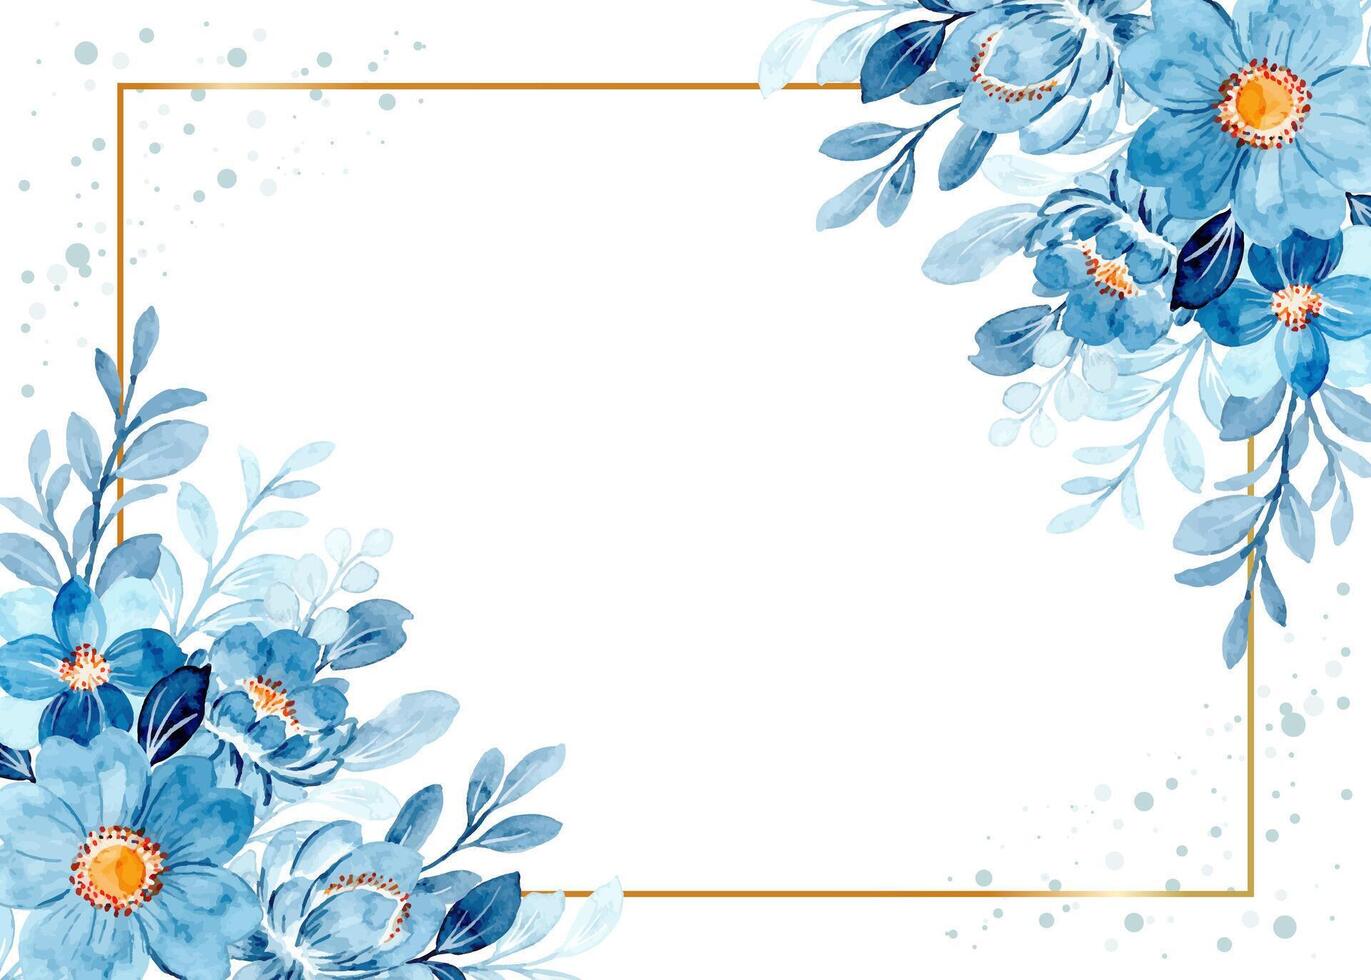 Blue floral frame with watercolor vector